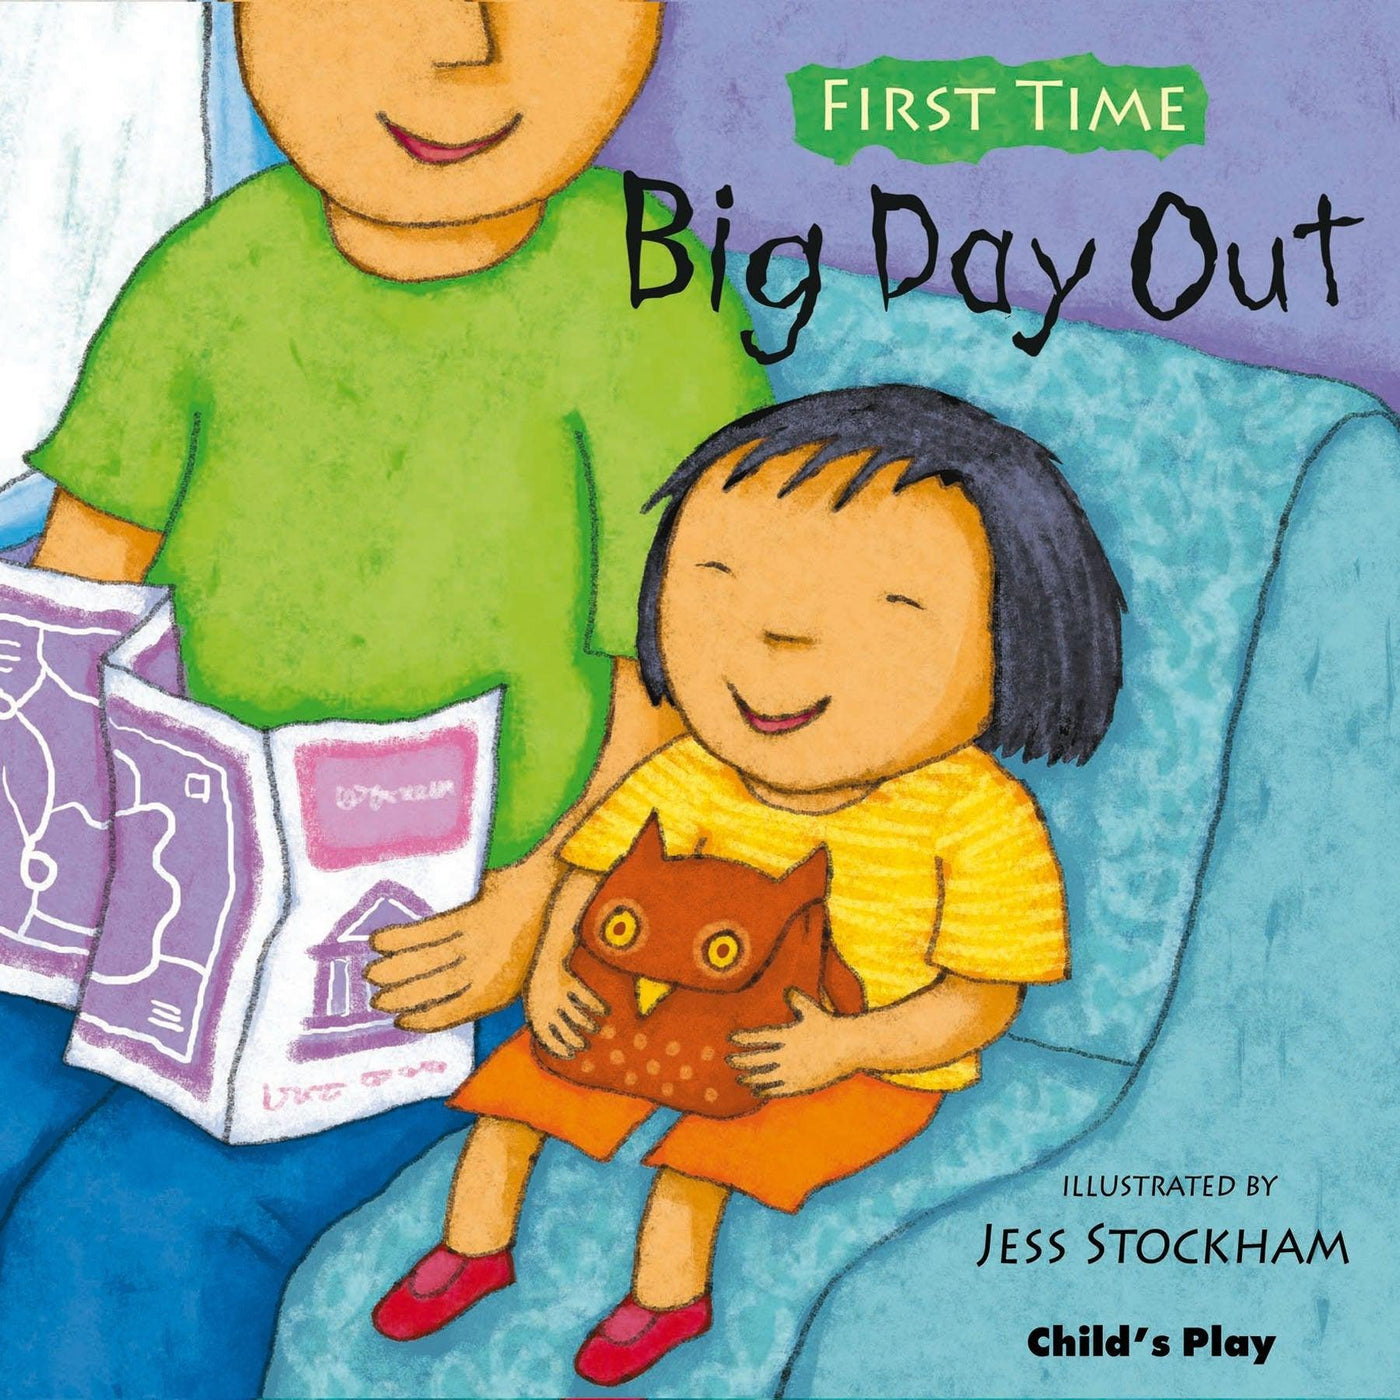 Big Day Out (First Time) - Jess Stockham